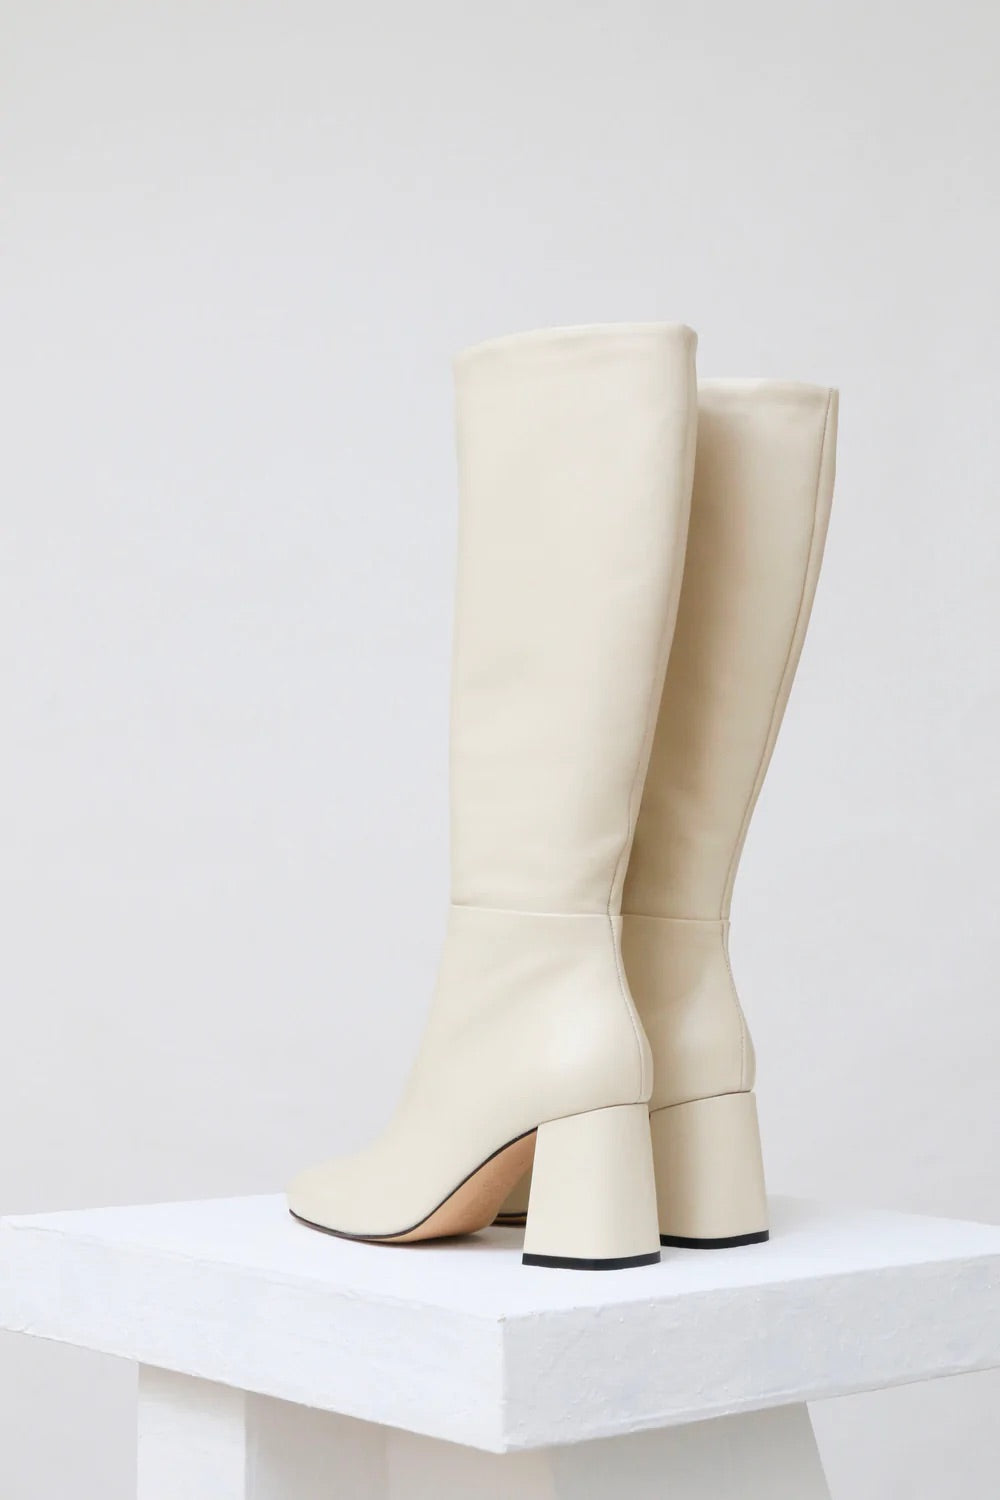 Souliers Martinez - Quitana Calf Leather High Boots: White